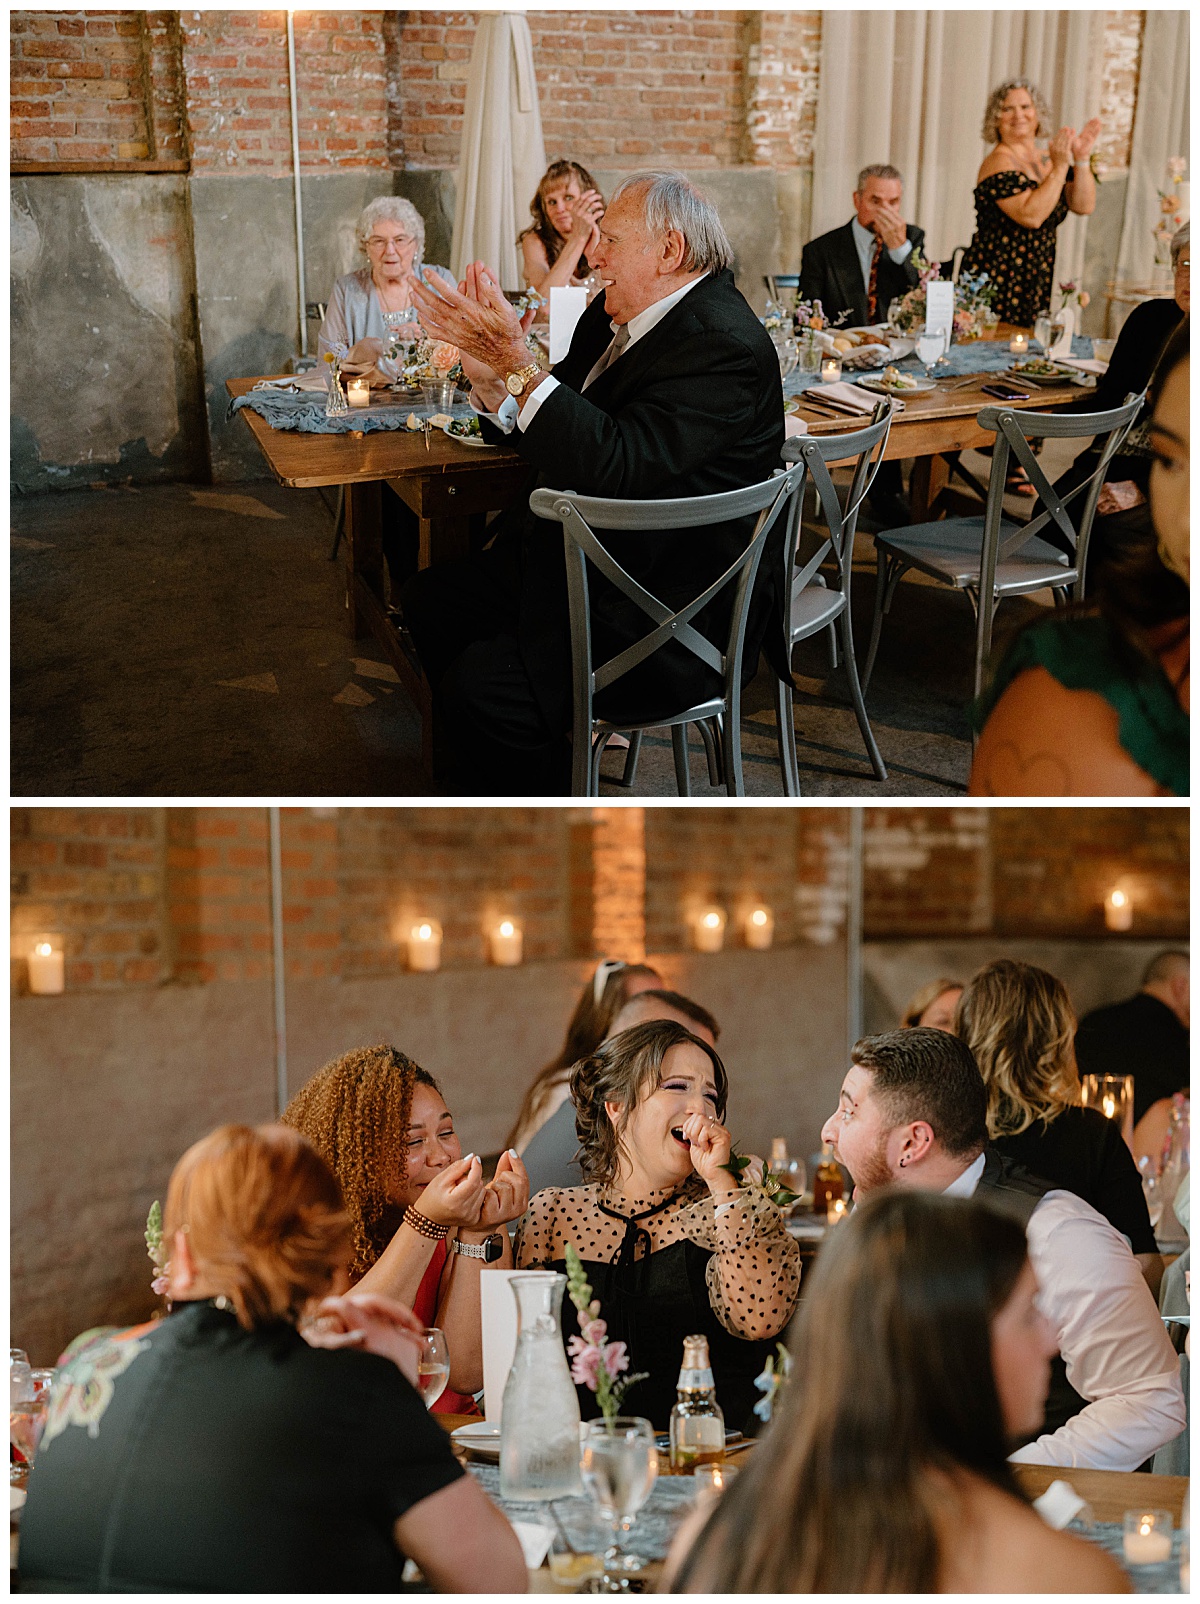 guests at reception celebrate and laugh together by Indigo Lace Collective